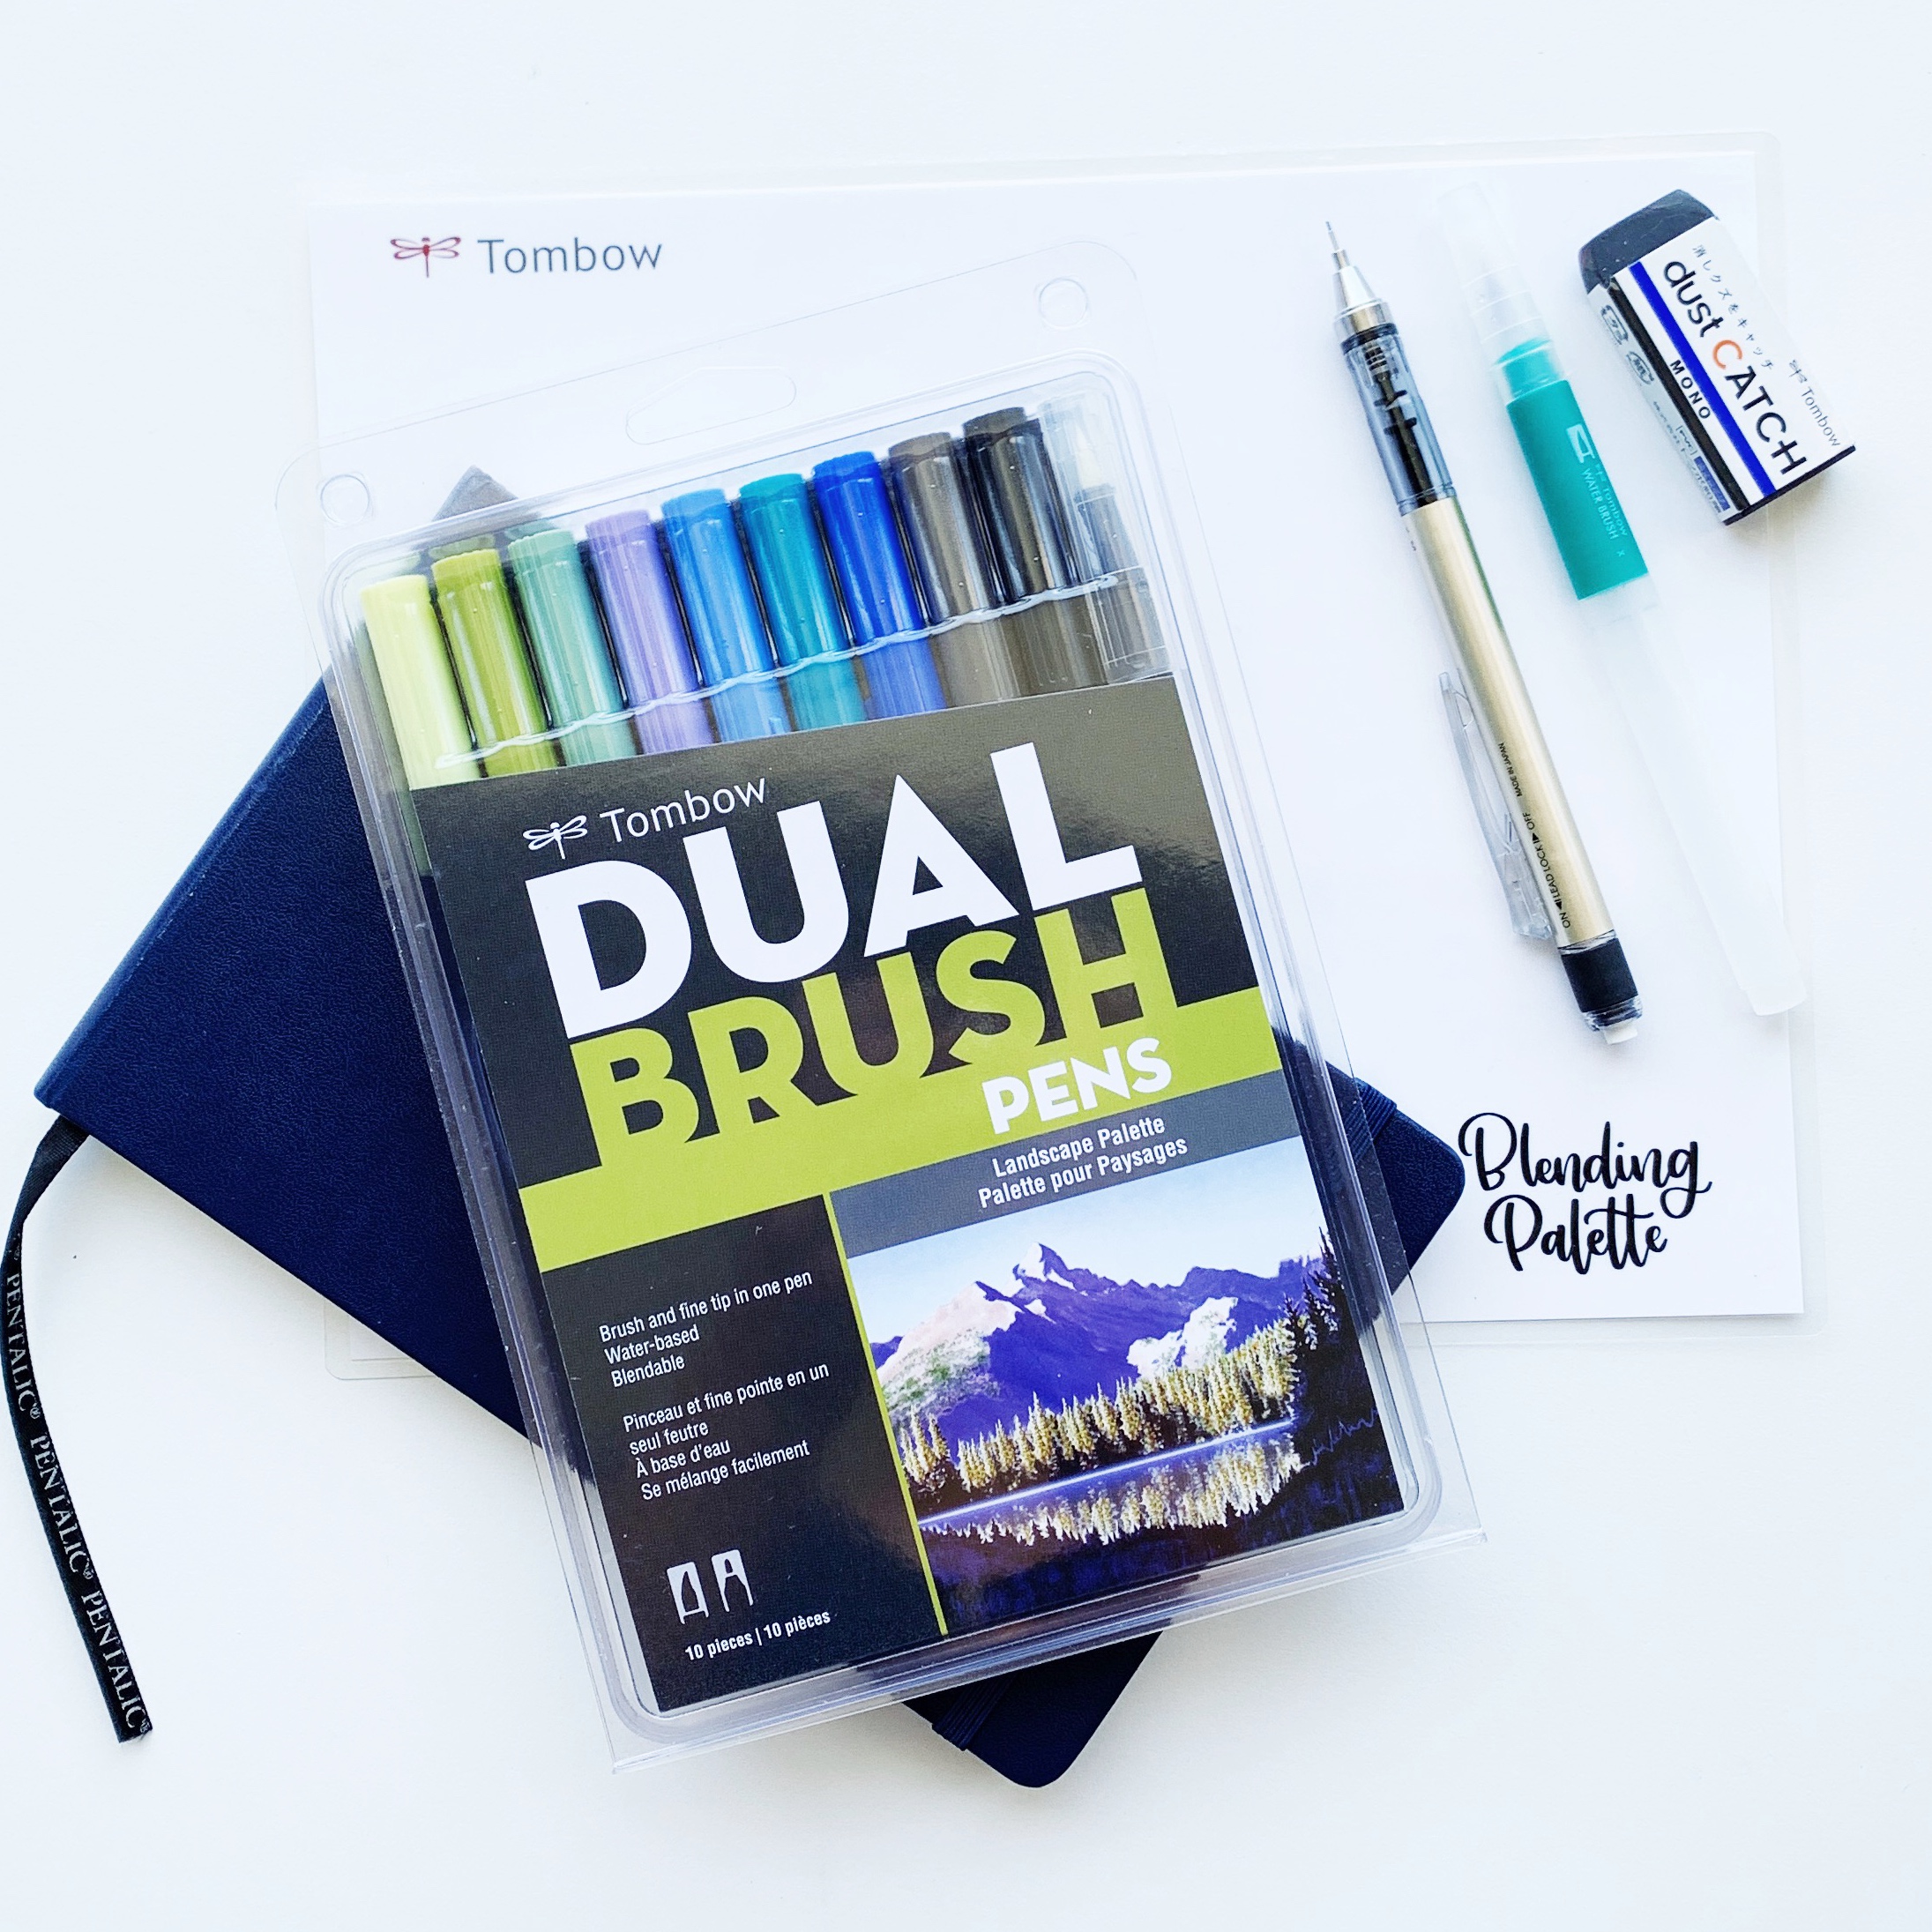 Learn how to create a travel art journal with Adrienne from @studio80design!